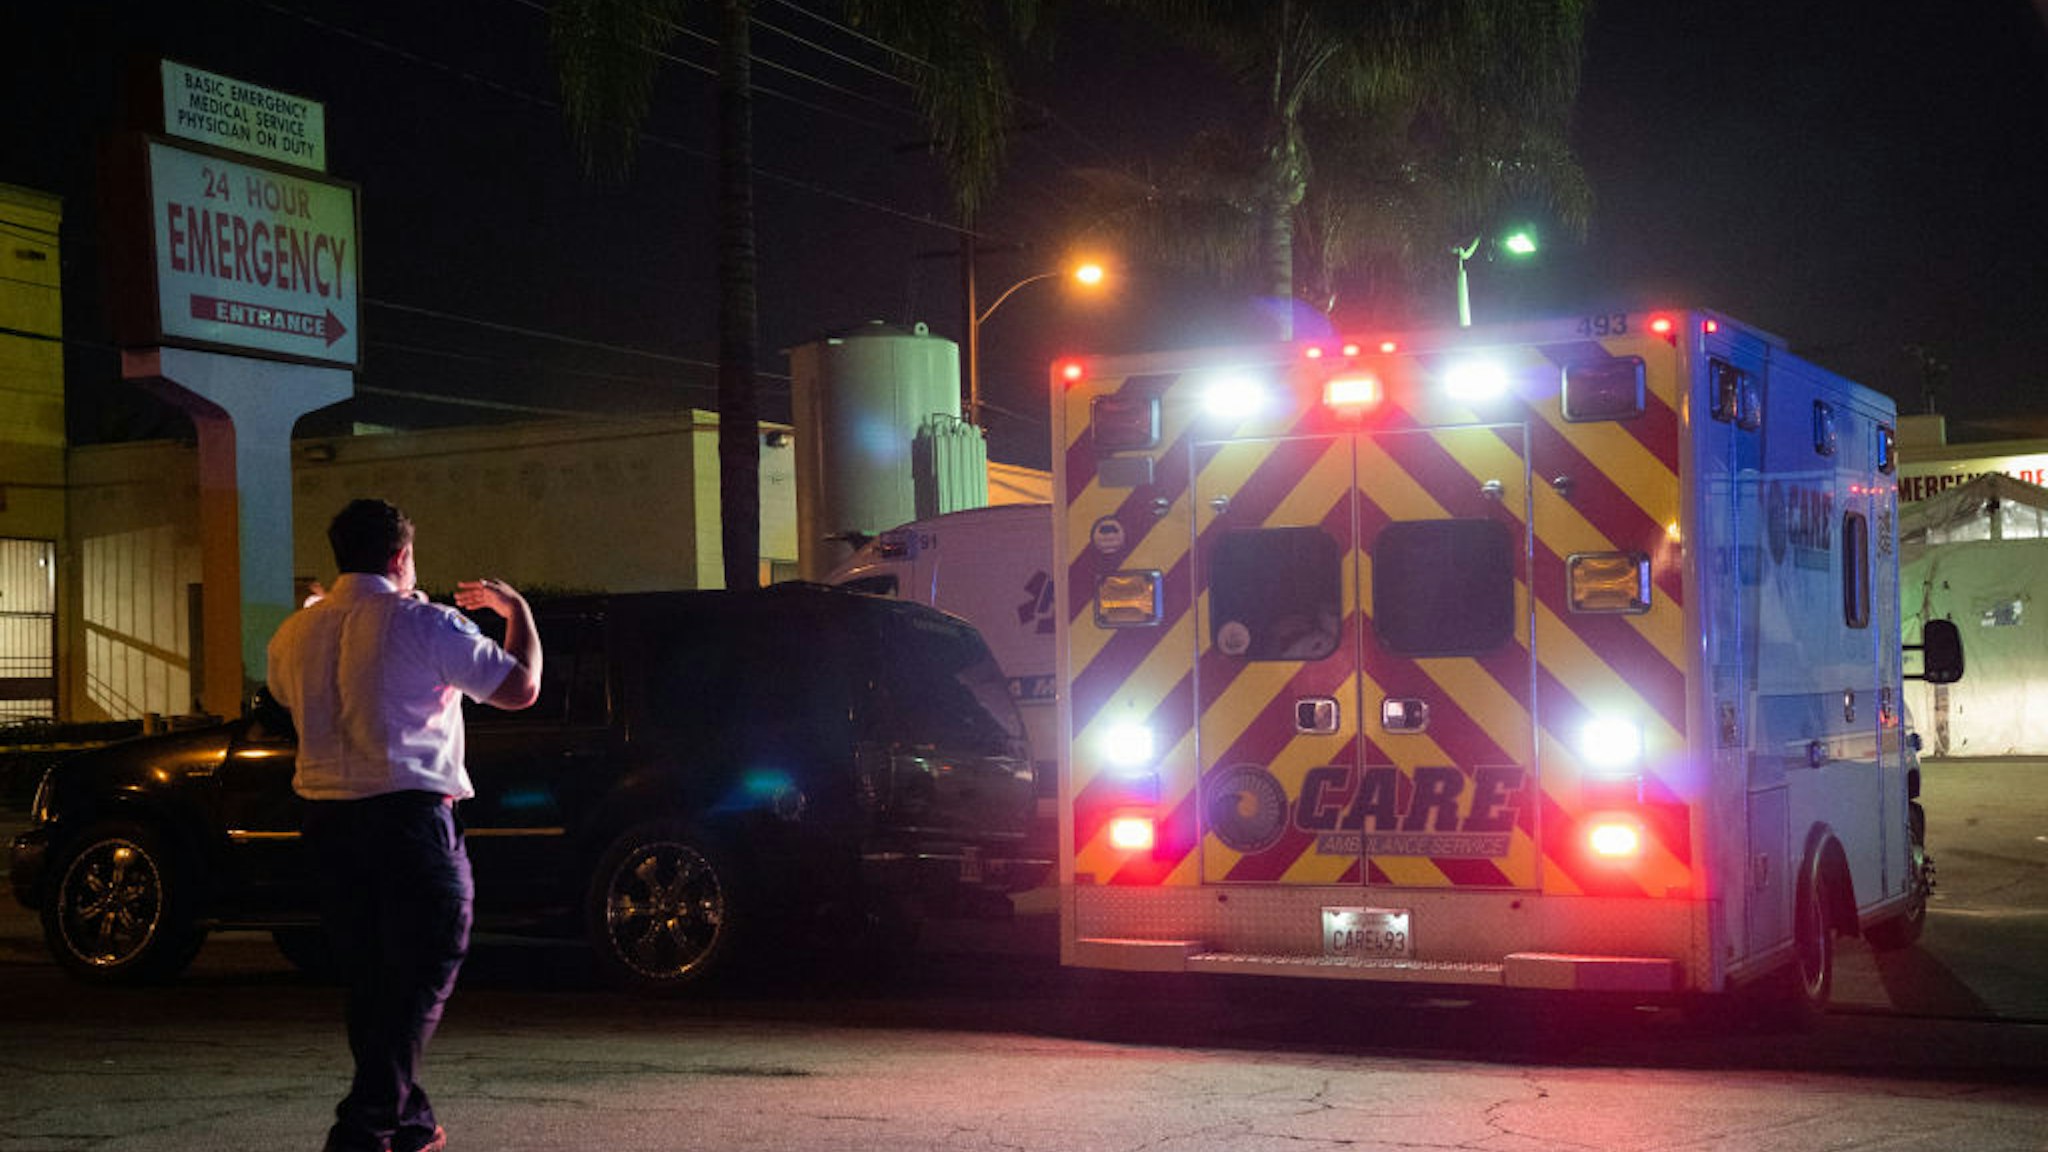 An emergency medical technician (EMT) directs an ambulance outside the emergency room of the East Los Angeles Doctors Hospital in Los Angeles, California, U.S., on Wednesday, Jan. 6, 2021. California reported 459 daily virus deaths, the second-highest tally since the pandemic began, as the most-populous state continues to battle a surge of cases that has strained health-care facilities. Photographer: Bing Guan/Bloomberg via Getty Images